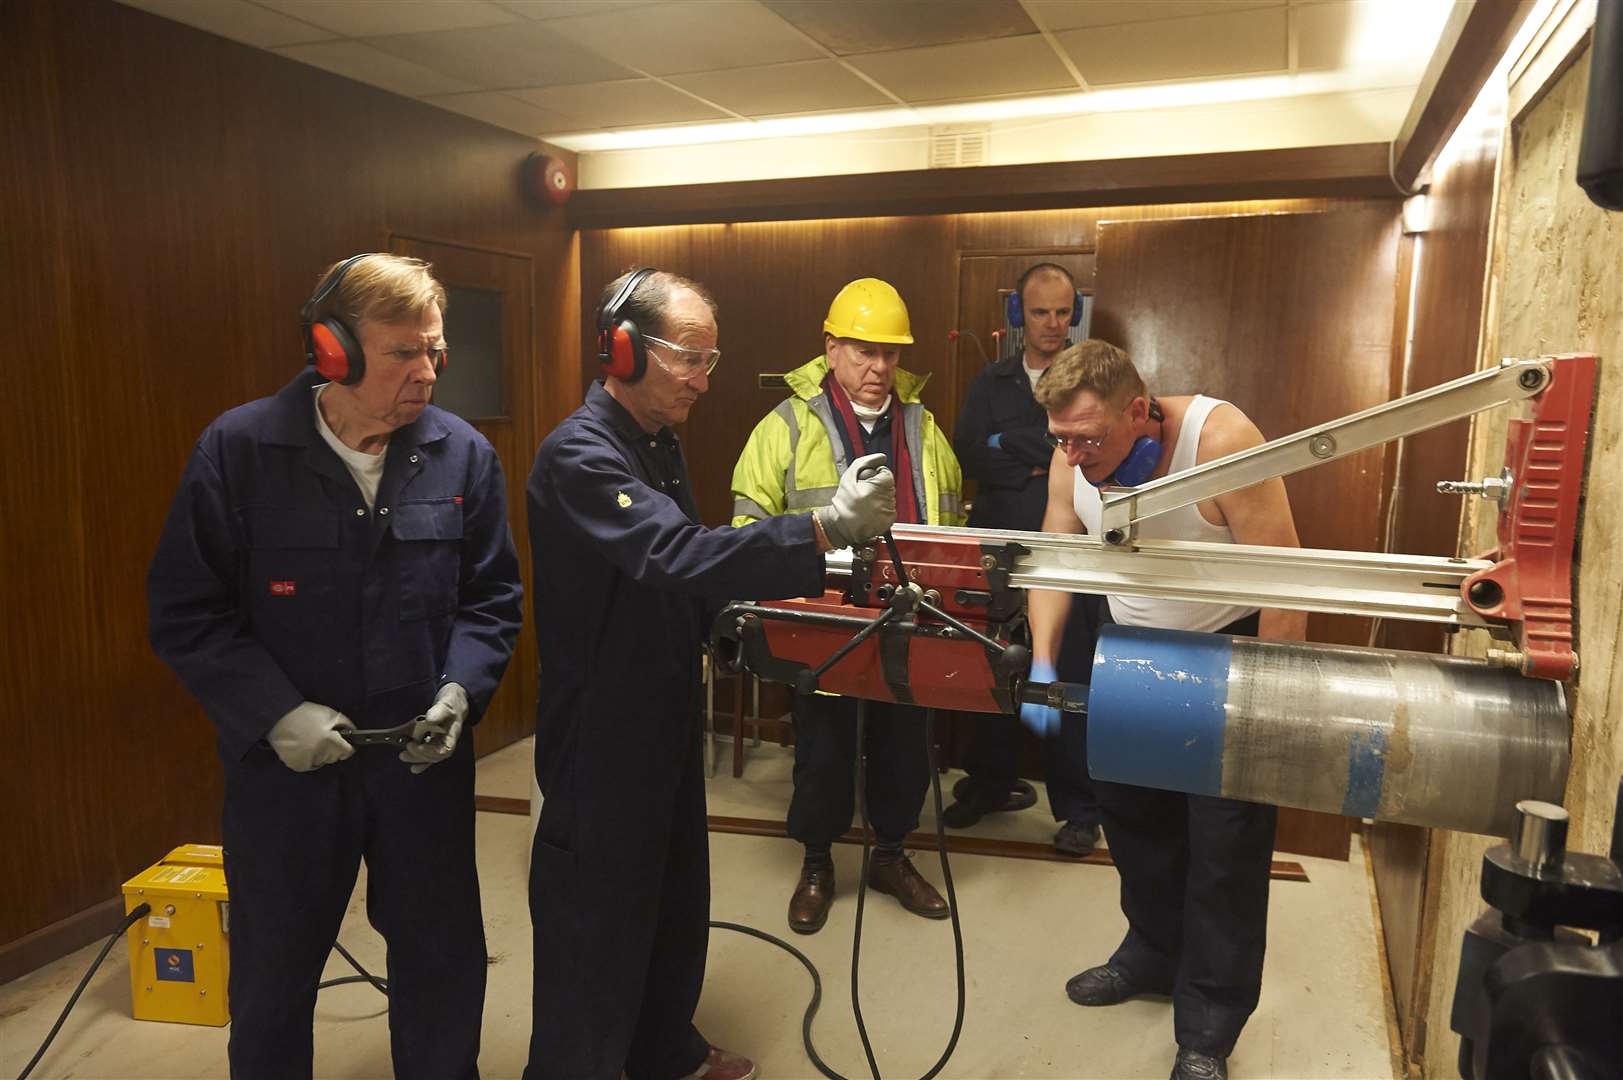 The group bore a hole through a thick concrete wall to break into the Hatton Garden Safe Deposit. Picture: ITV